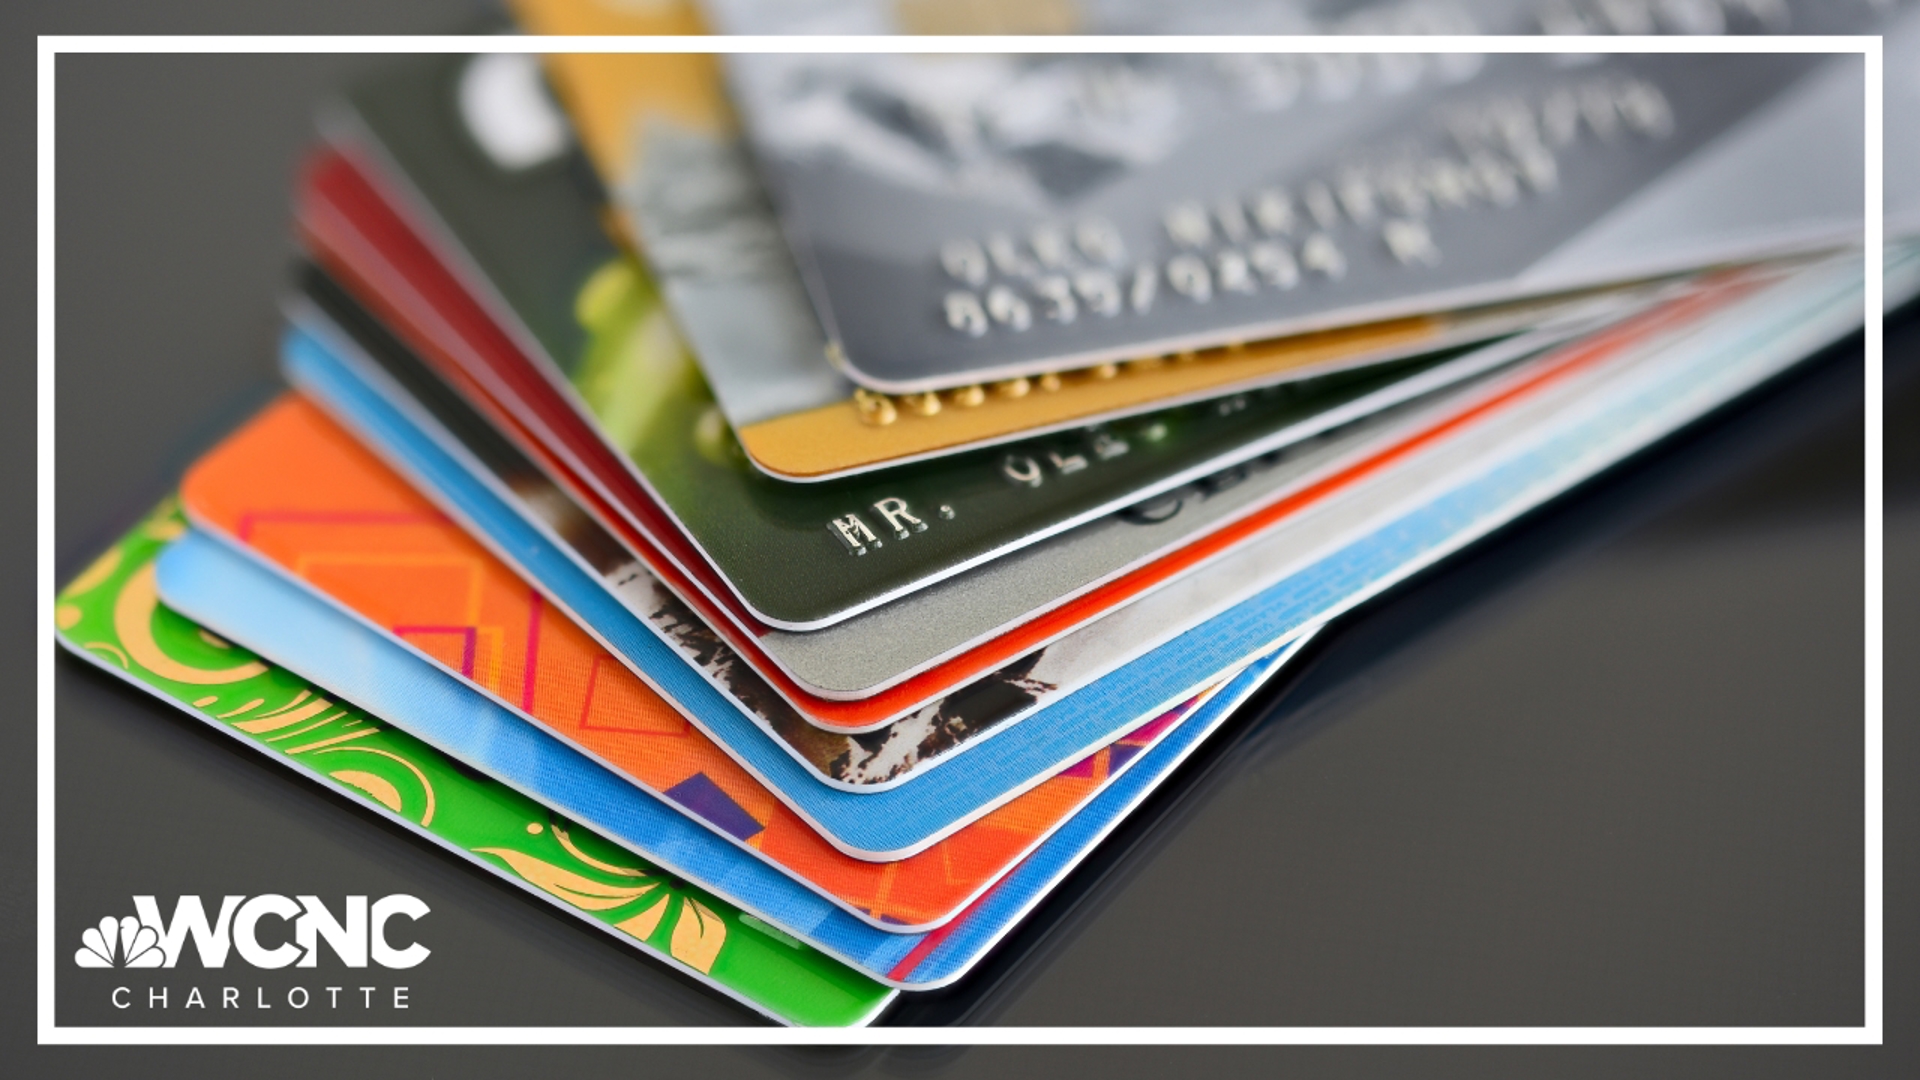 The new regulations that were proposed by Consumer Financial Protection Bureau would have set a ceiling of $8 for most credit card late fees.